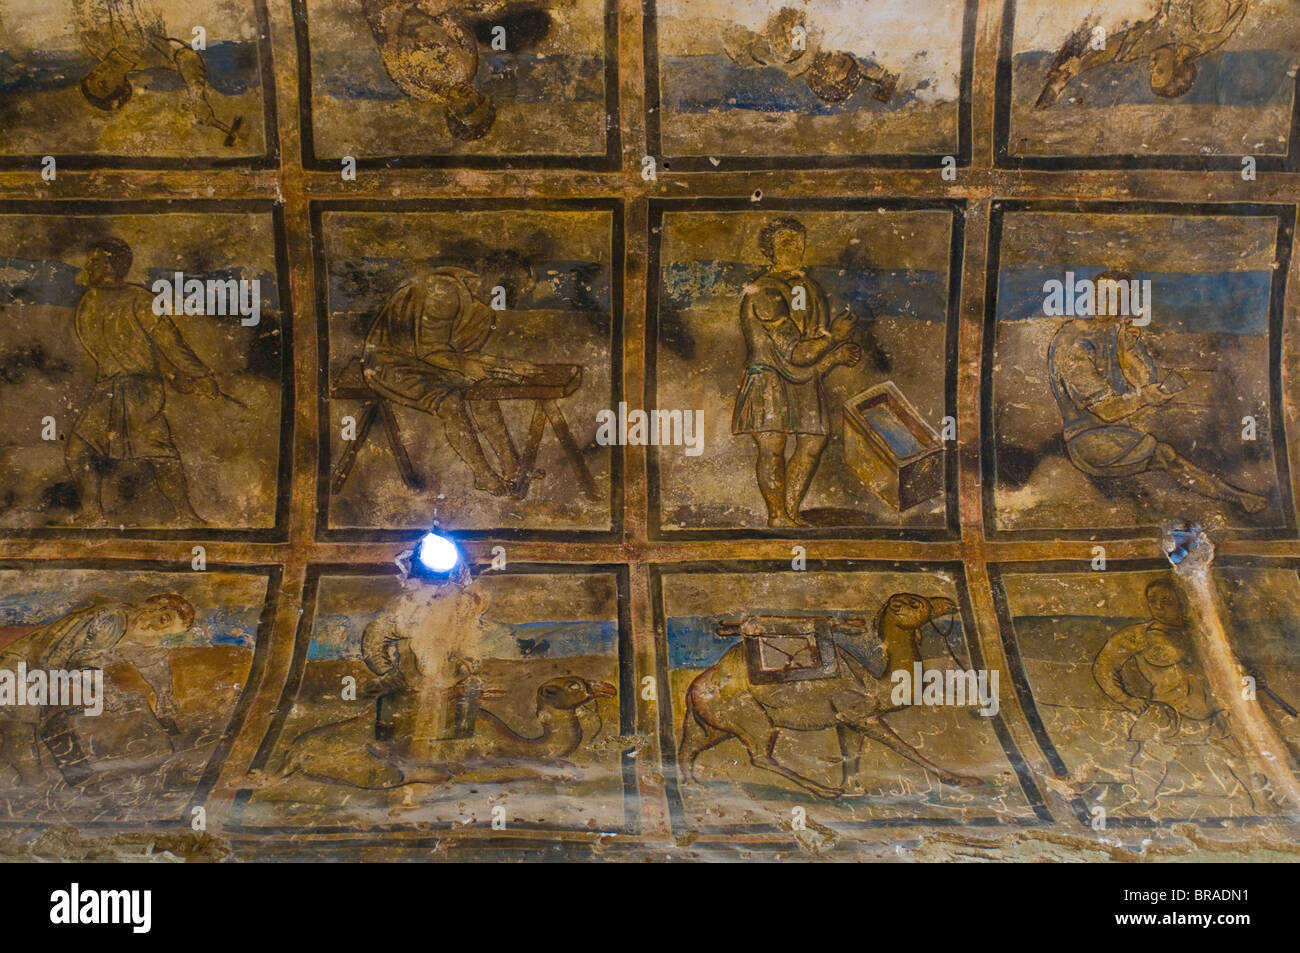 Old frescoes in the  Quseir Amra castle, UNESCO World Heritage Site, Jordan, Middle East Stock Photo